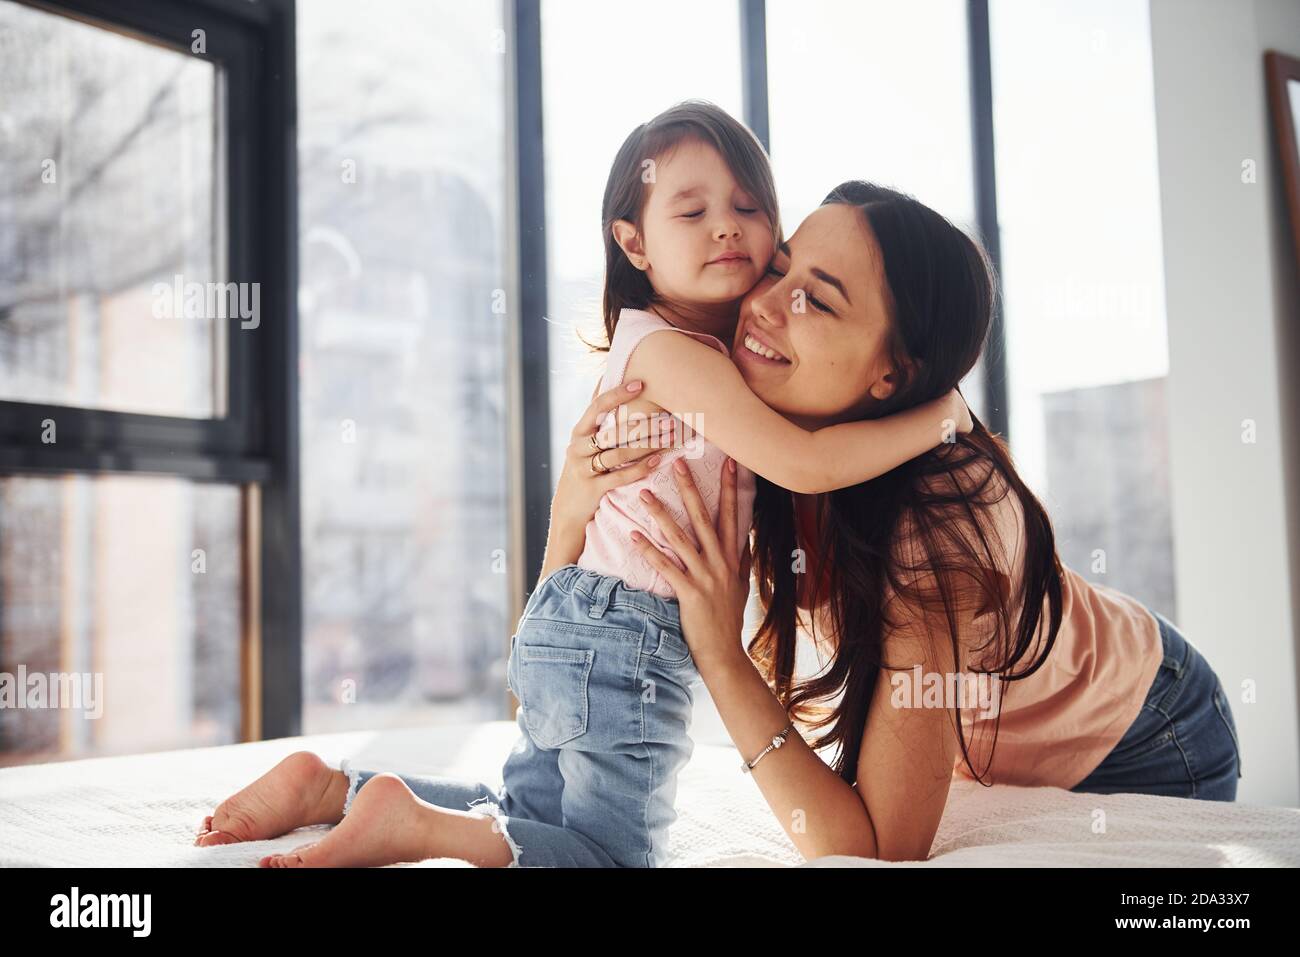 Young mother with her daughter embracing each other on bed Stock Photo